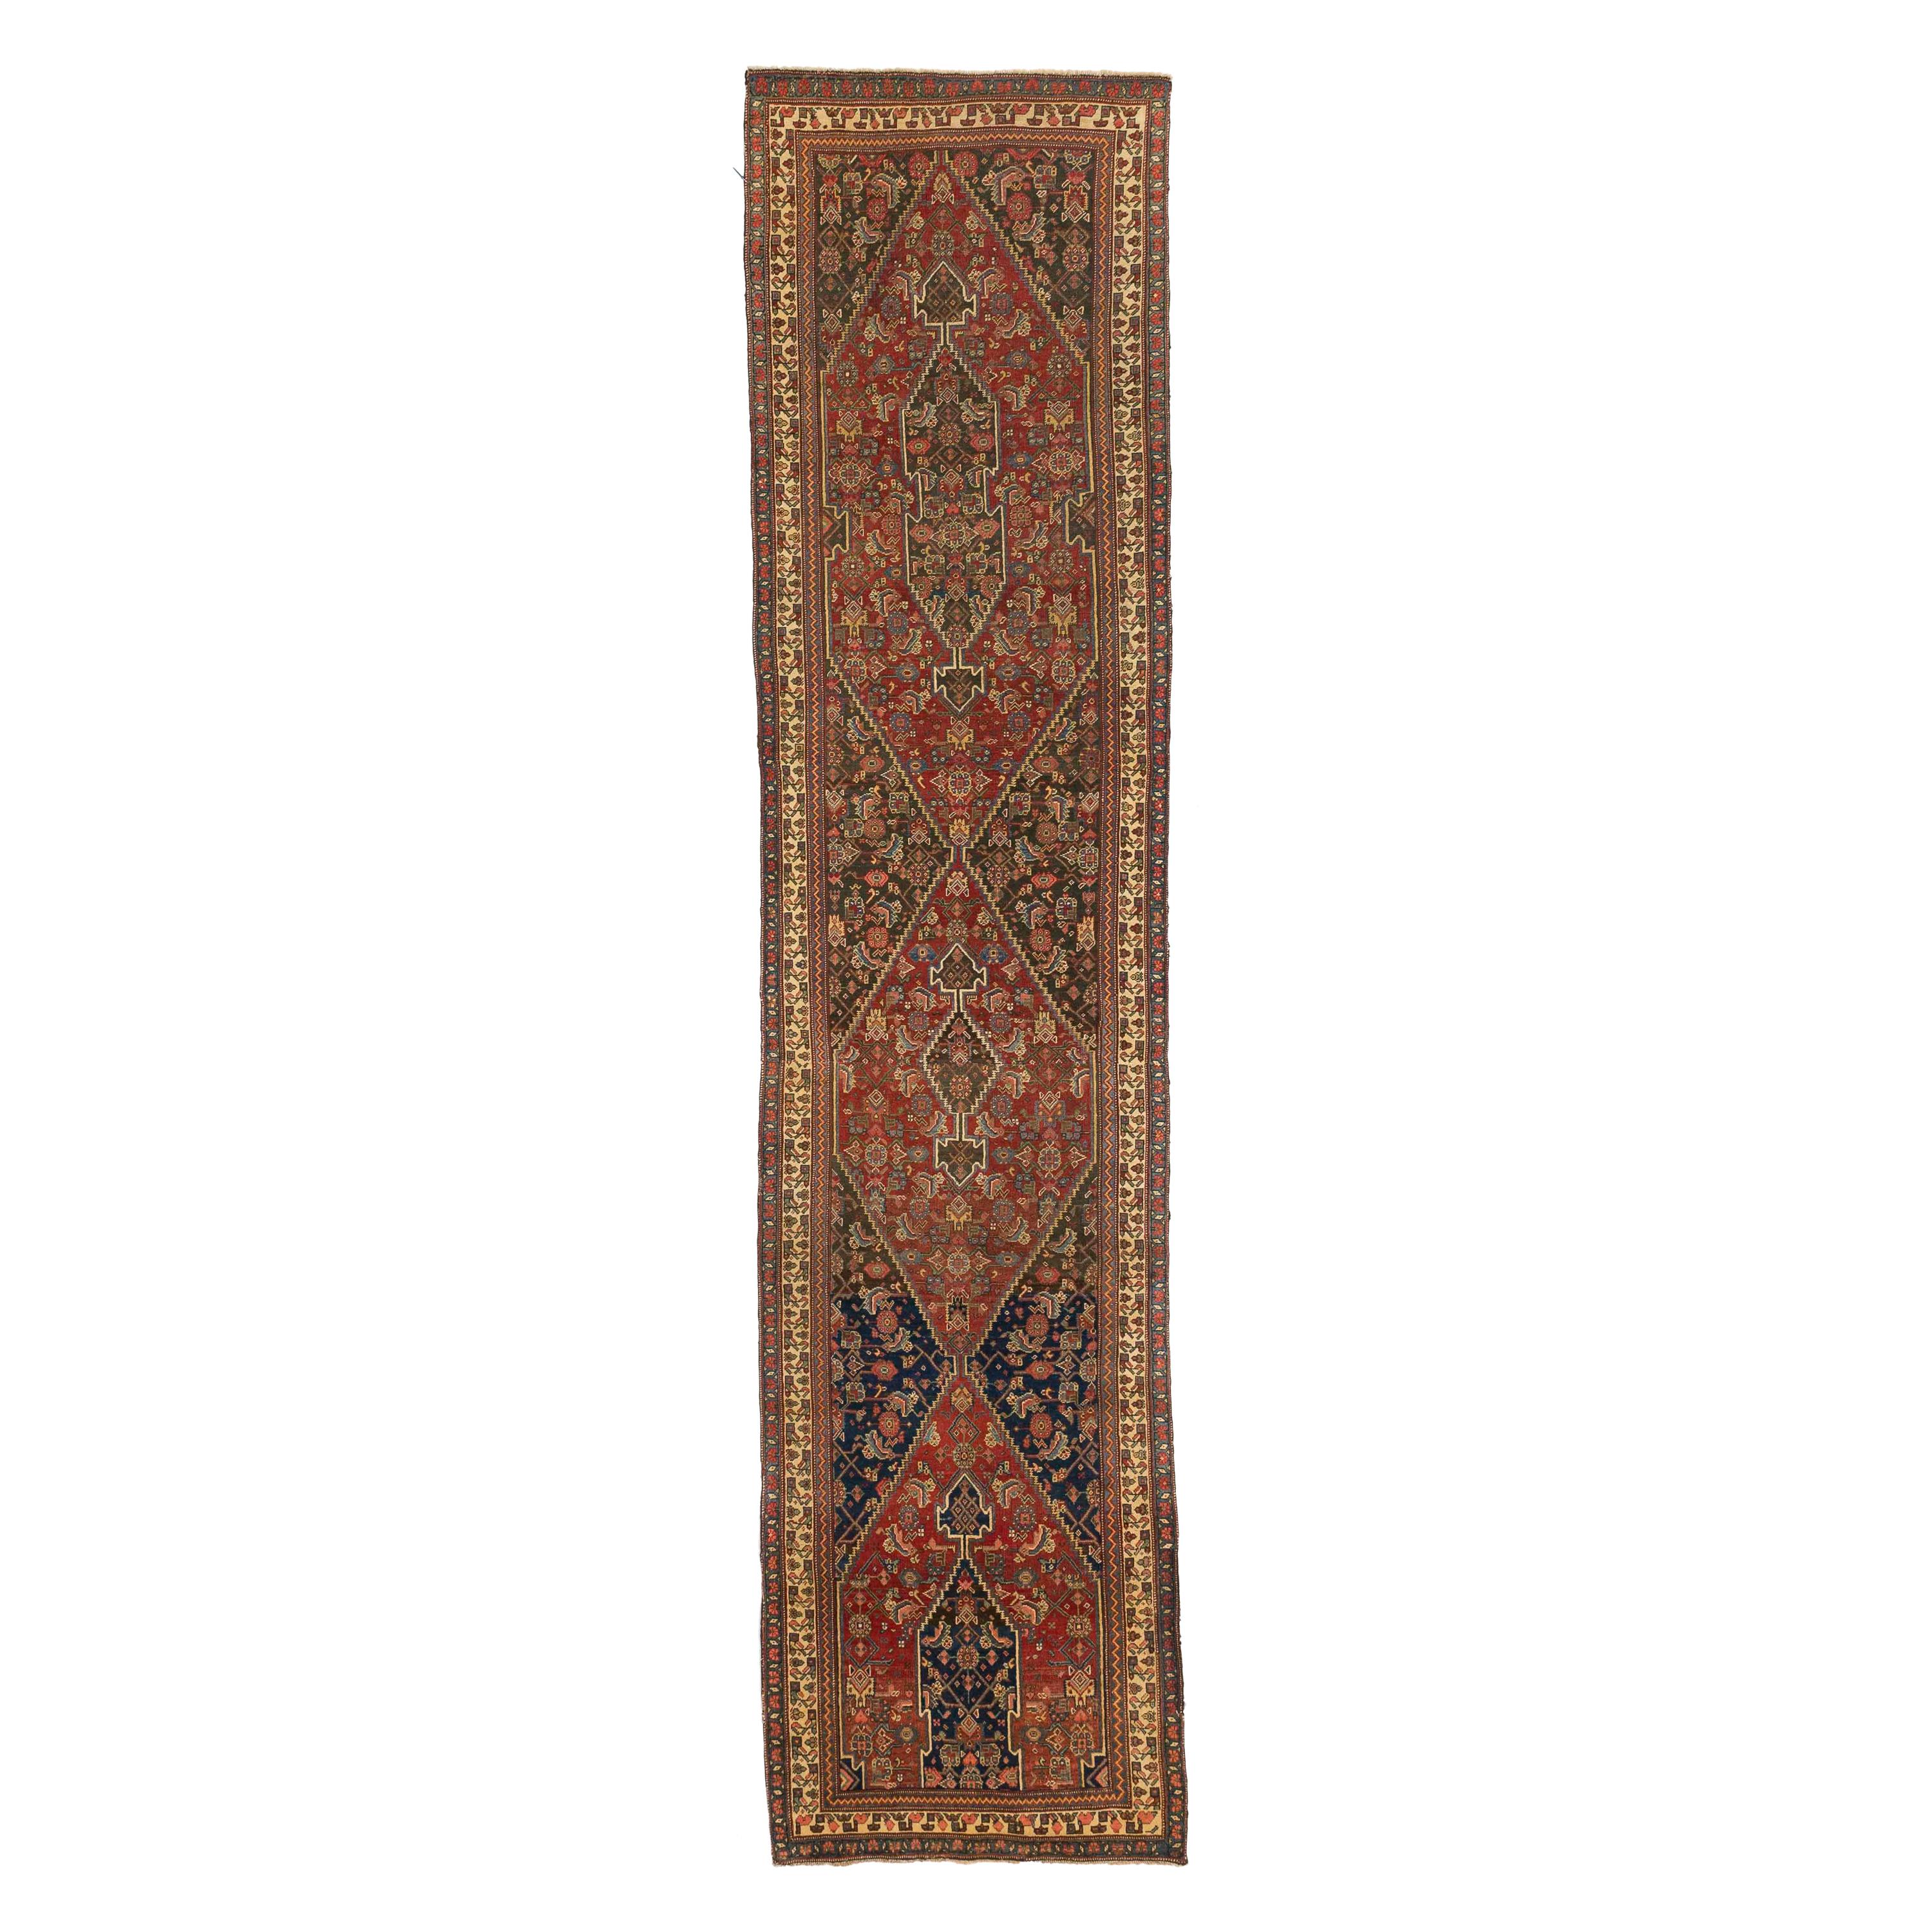 Antique Persian Bijar Runner Rug with Navy Blue and Red Floral Medallions